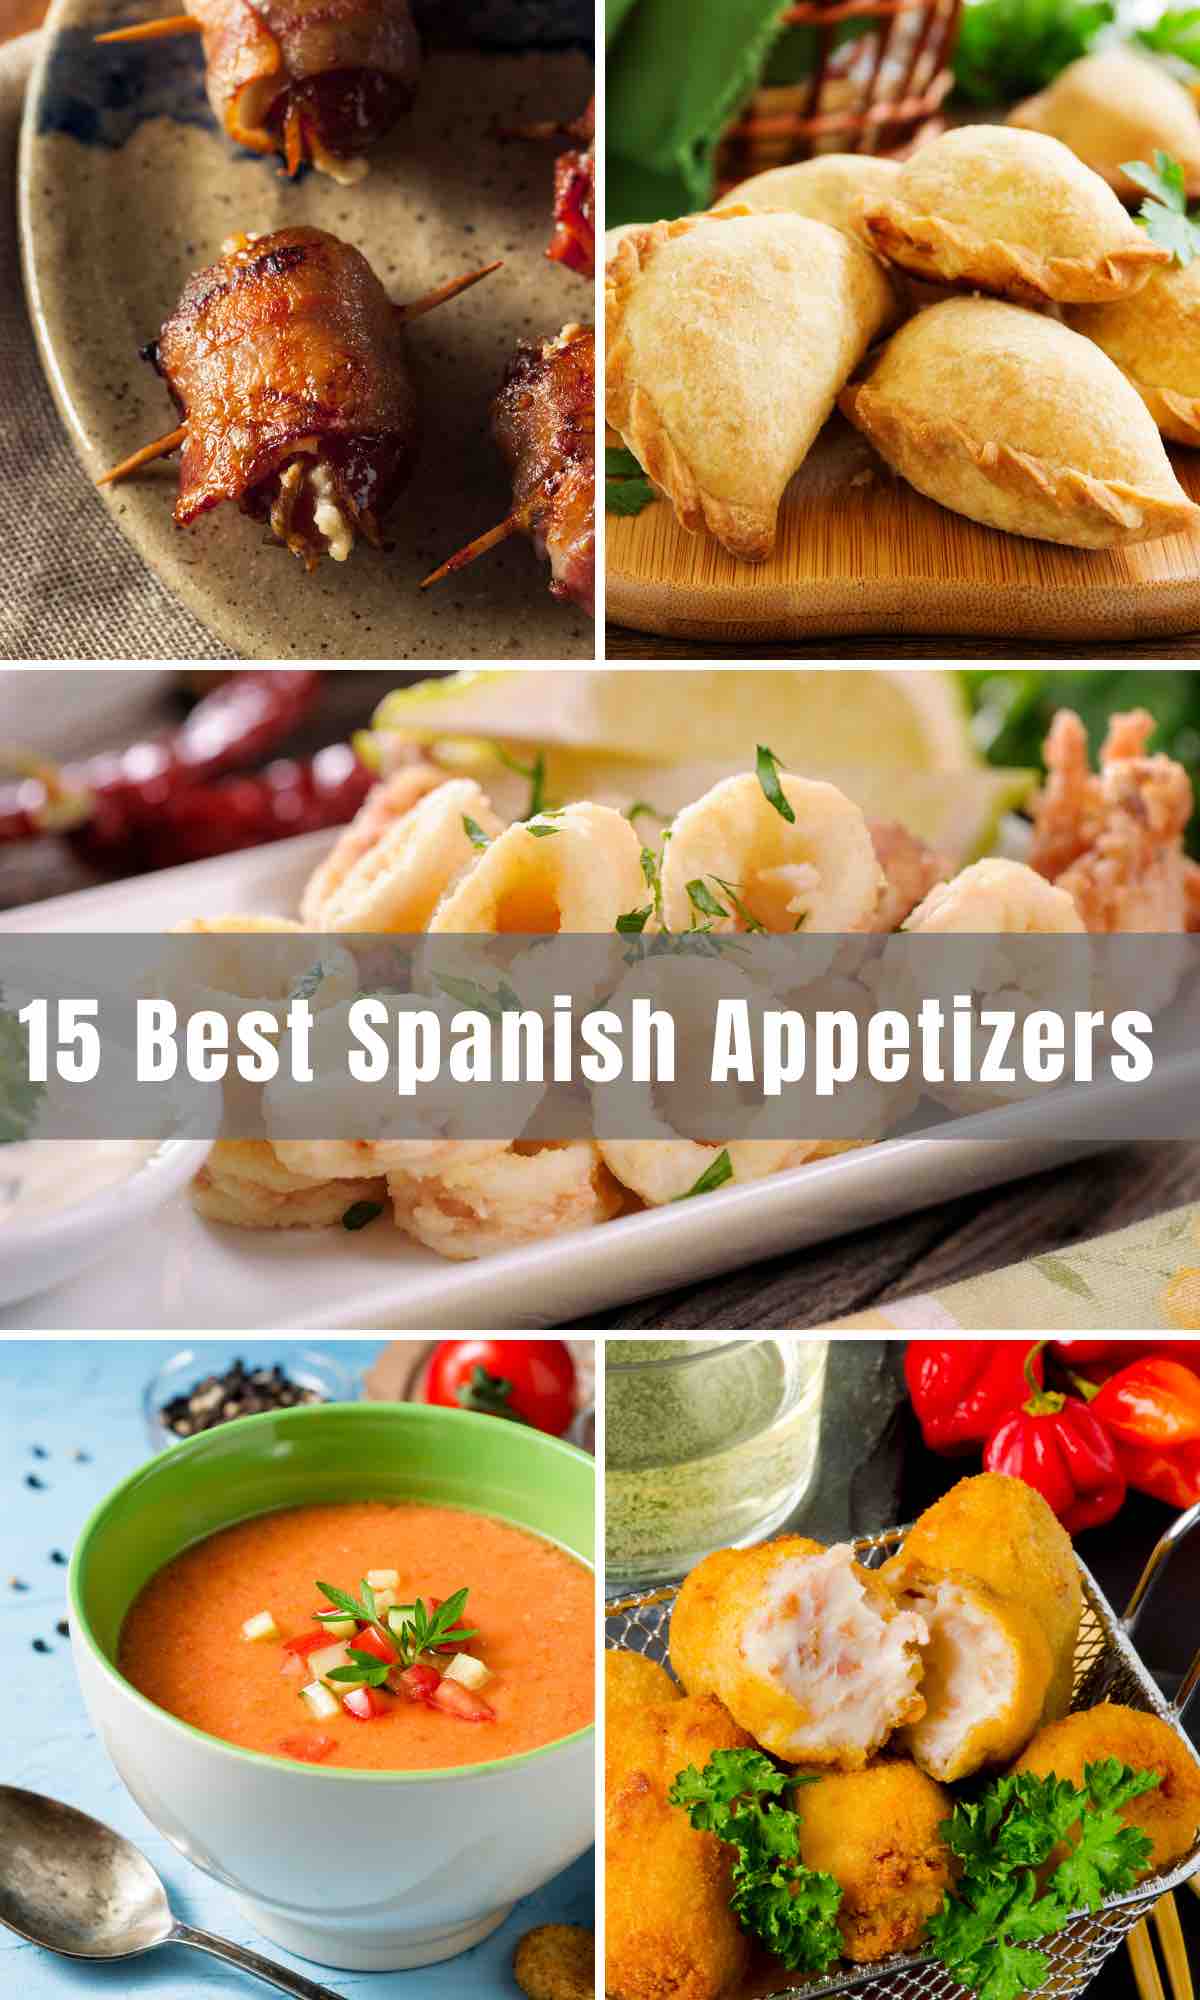 Looking for easy and delicious Spanish Appetizers? From Gazpacho to Spanish meatballs, I’ve compiled a list of authentic Spanish starters that you can make yourself to host your own tapas night at home!